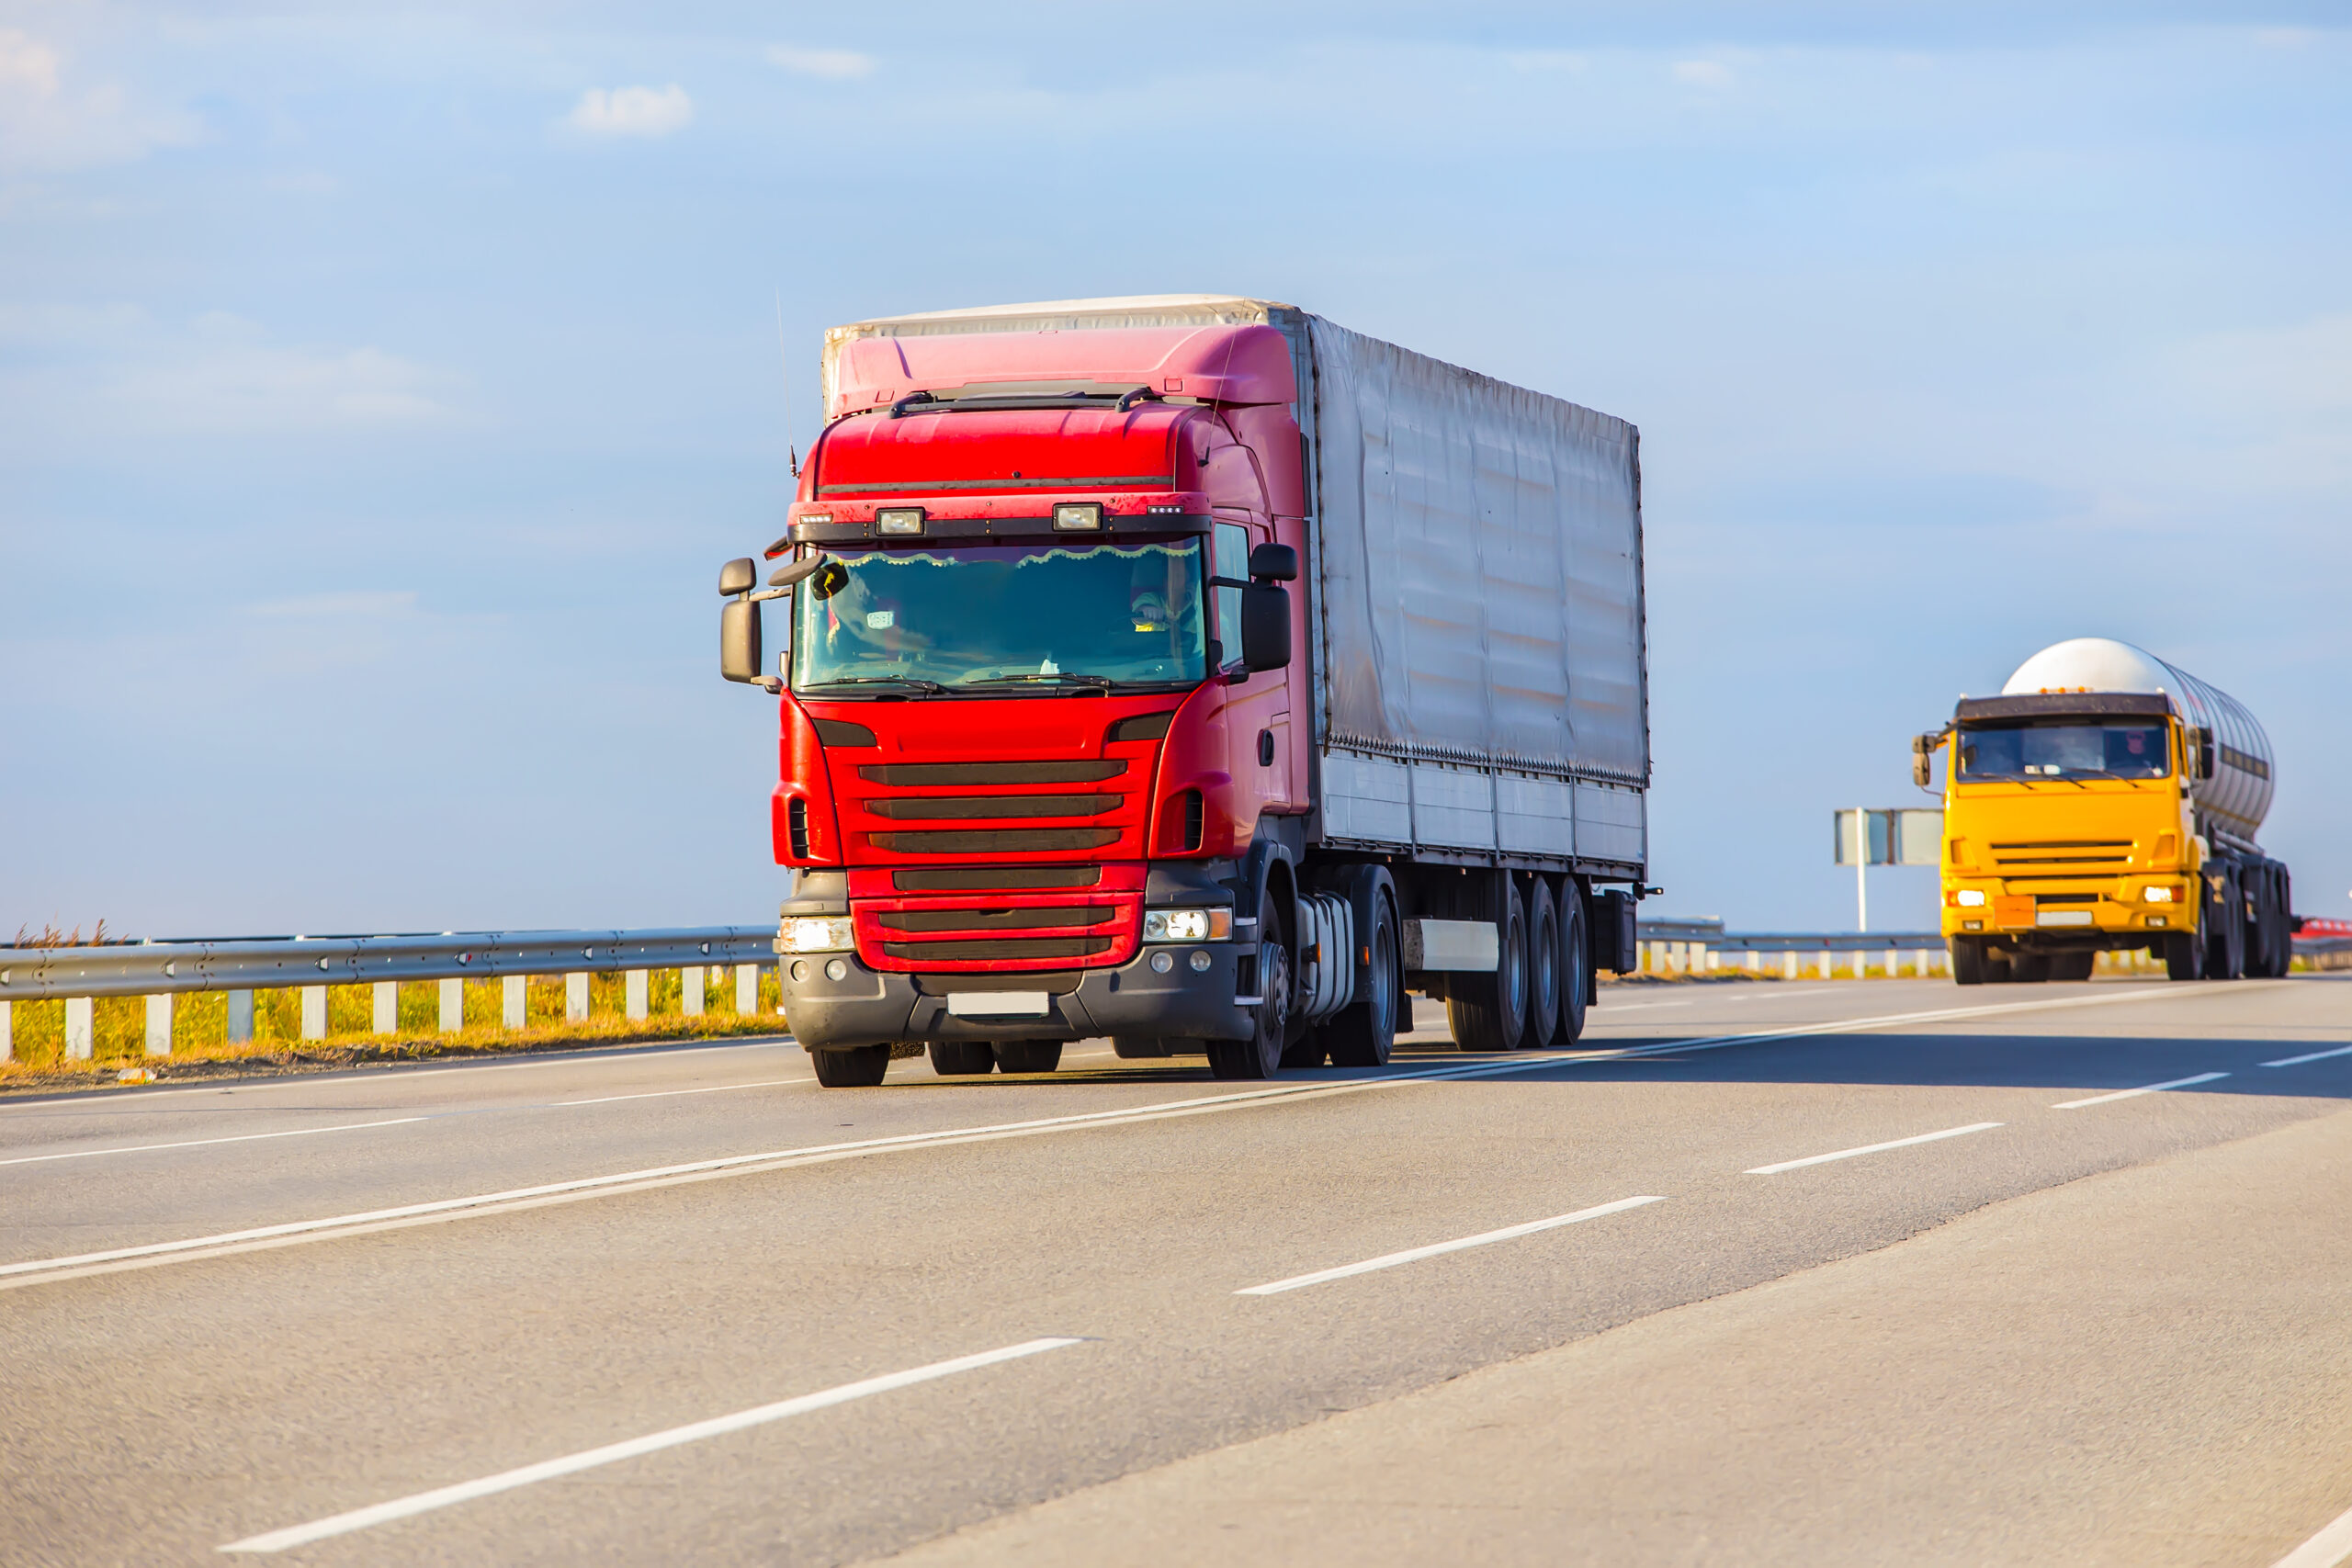 How Do Laws Differ for Personal Injury Claims Involving Trucking Companies vs. Individual Drivers?